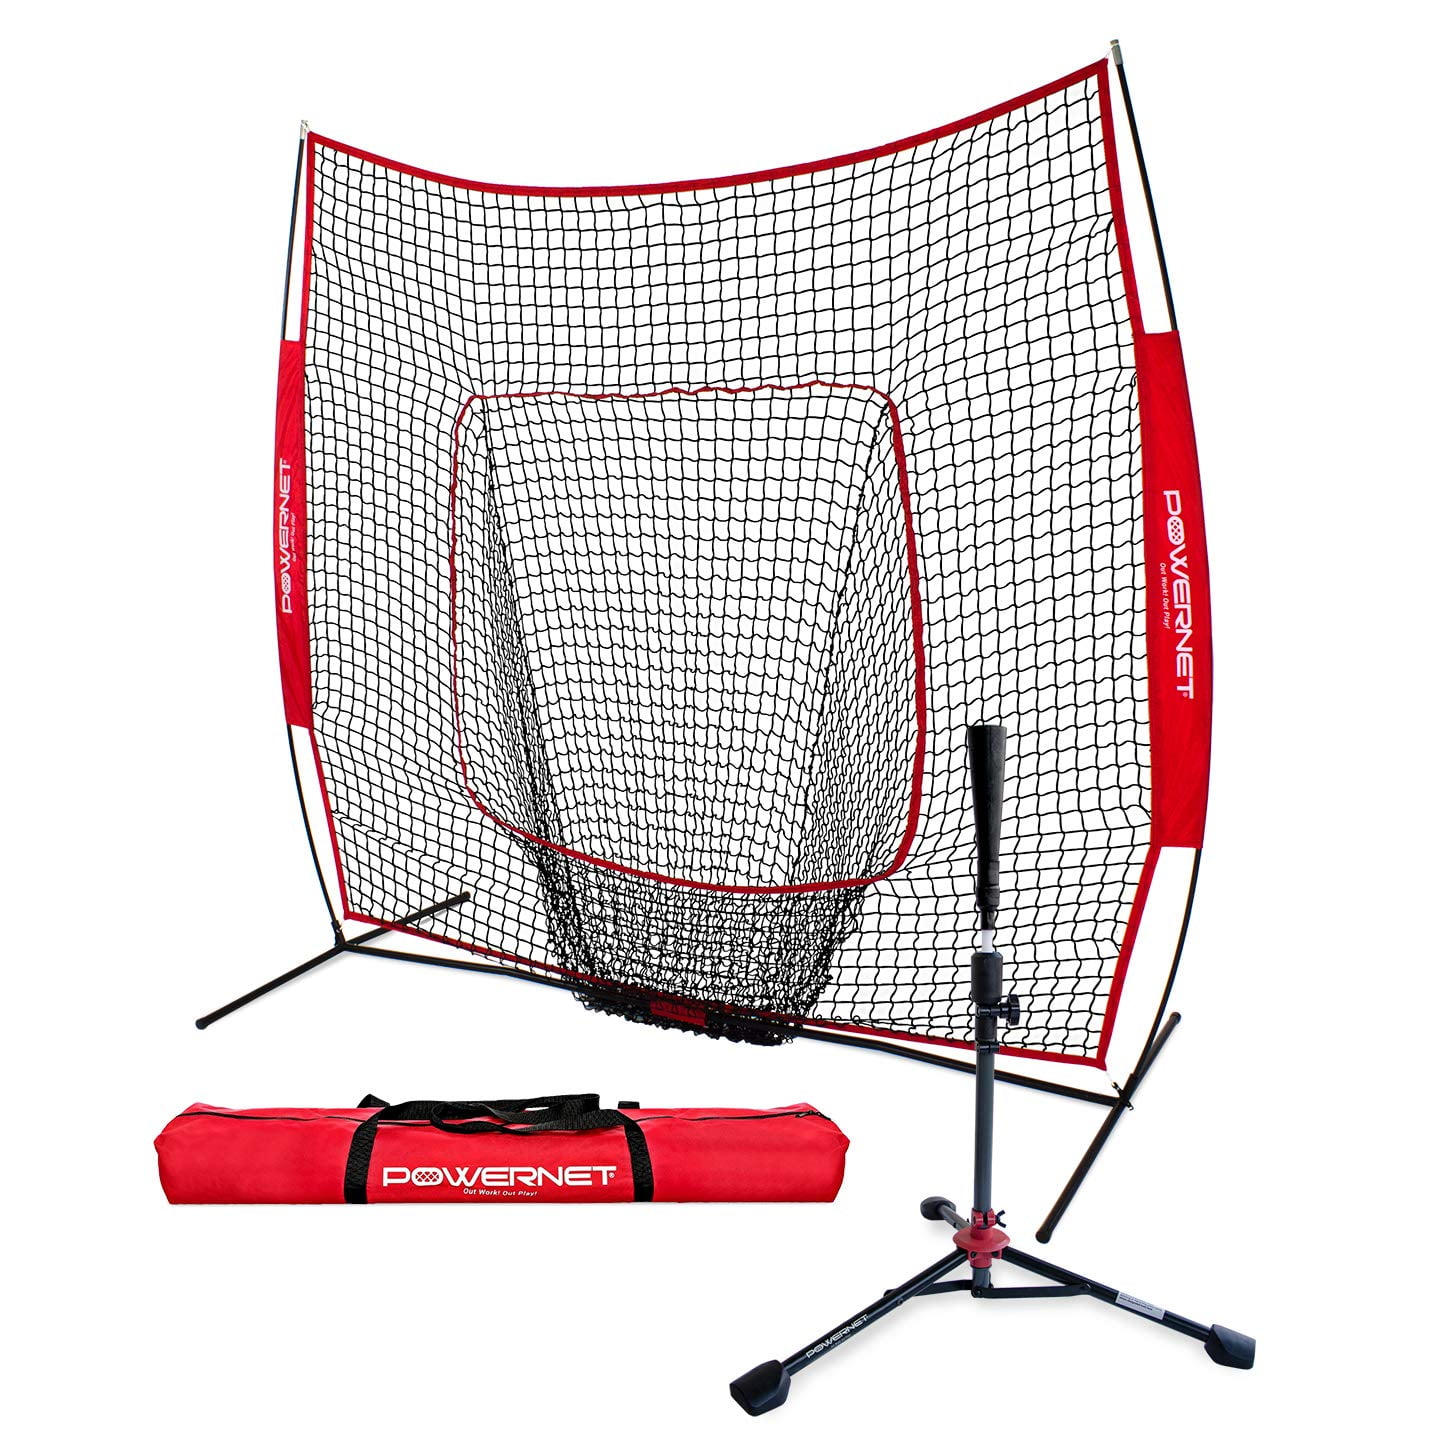 PowerNet 7x7 Baseball Softball Net and Tee Bundle | Durable Construction |  Solo Batting Practice for Improved Hitting